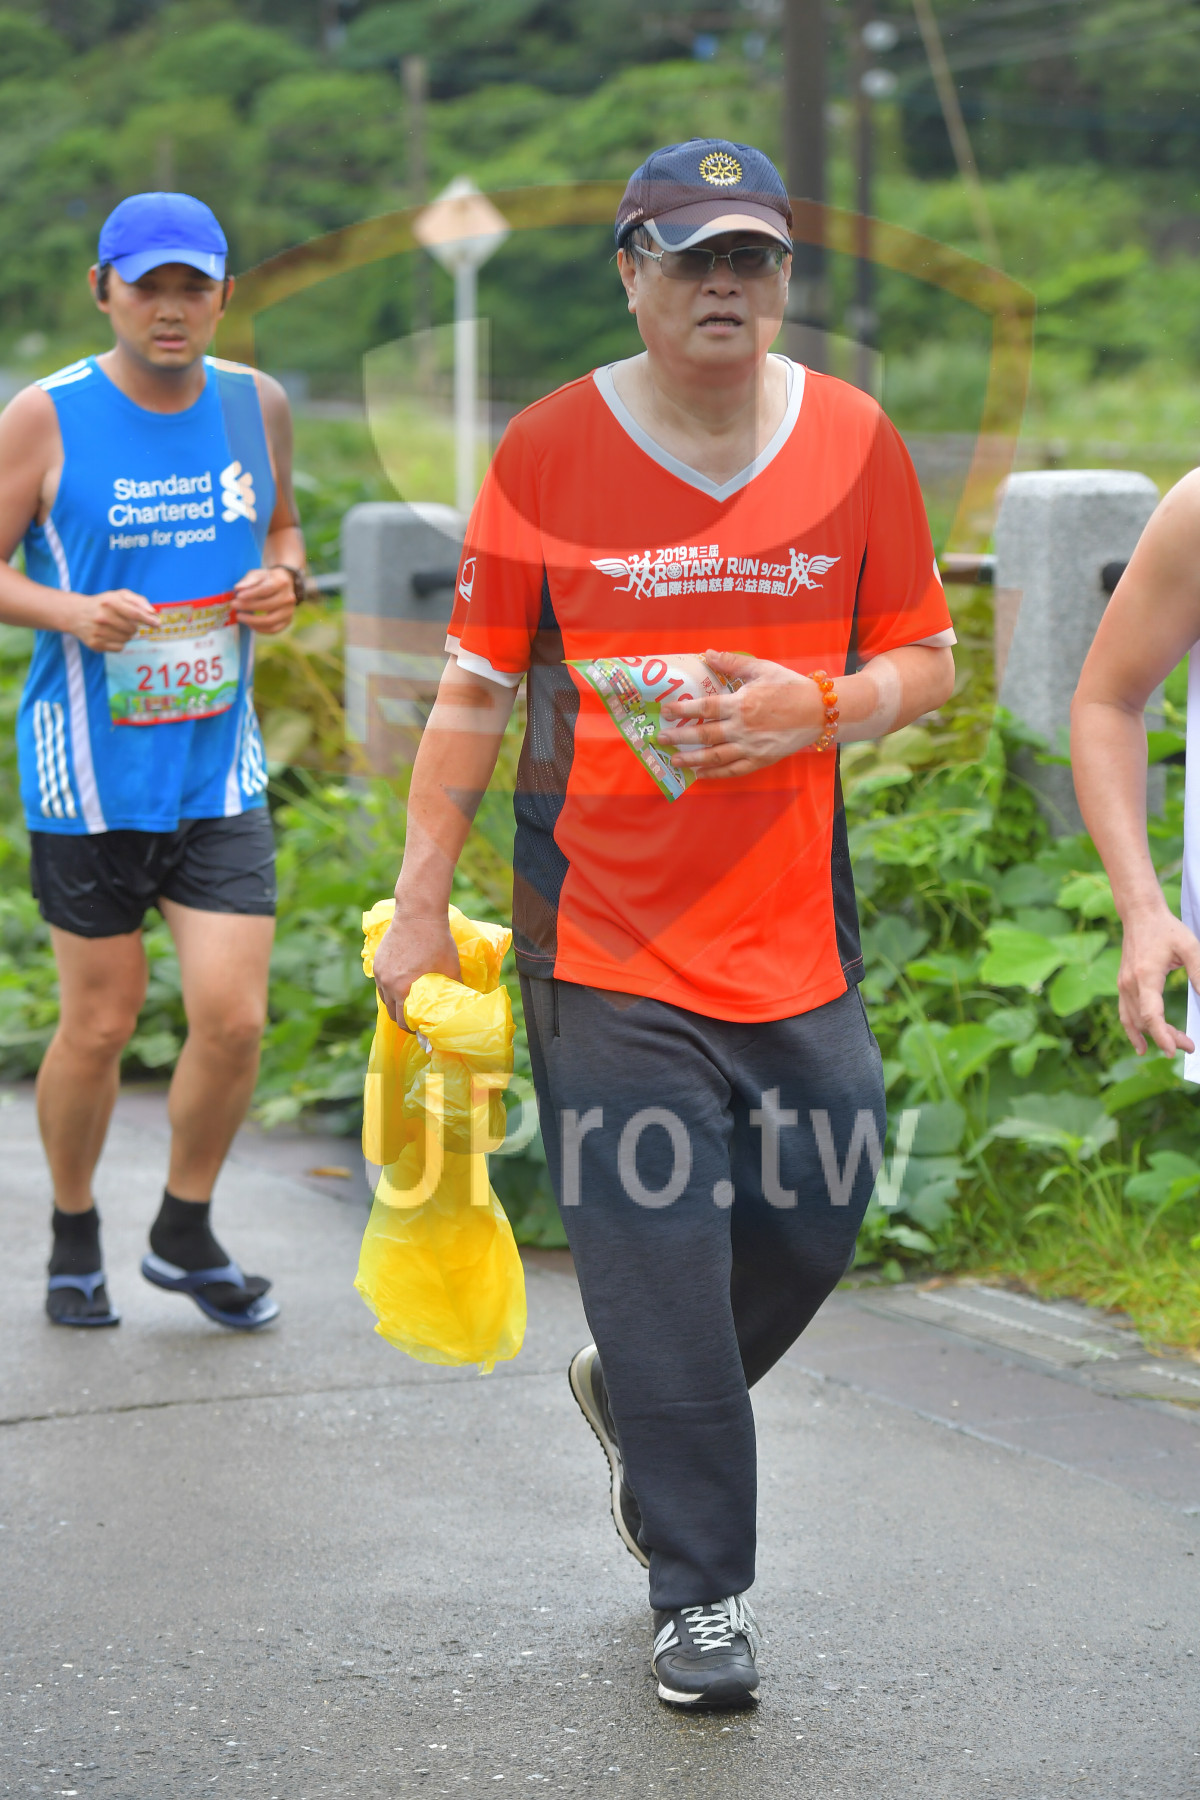 Standard,Chartered,Here for good,2019,ROTARY RUN 9/29,R/,21285|